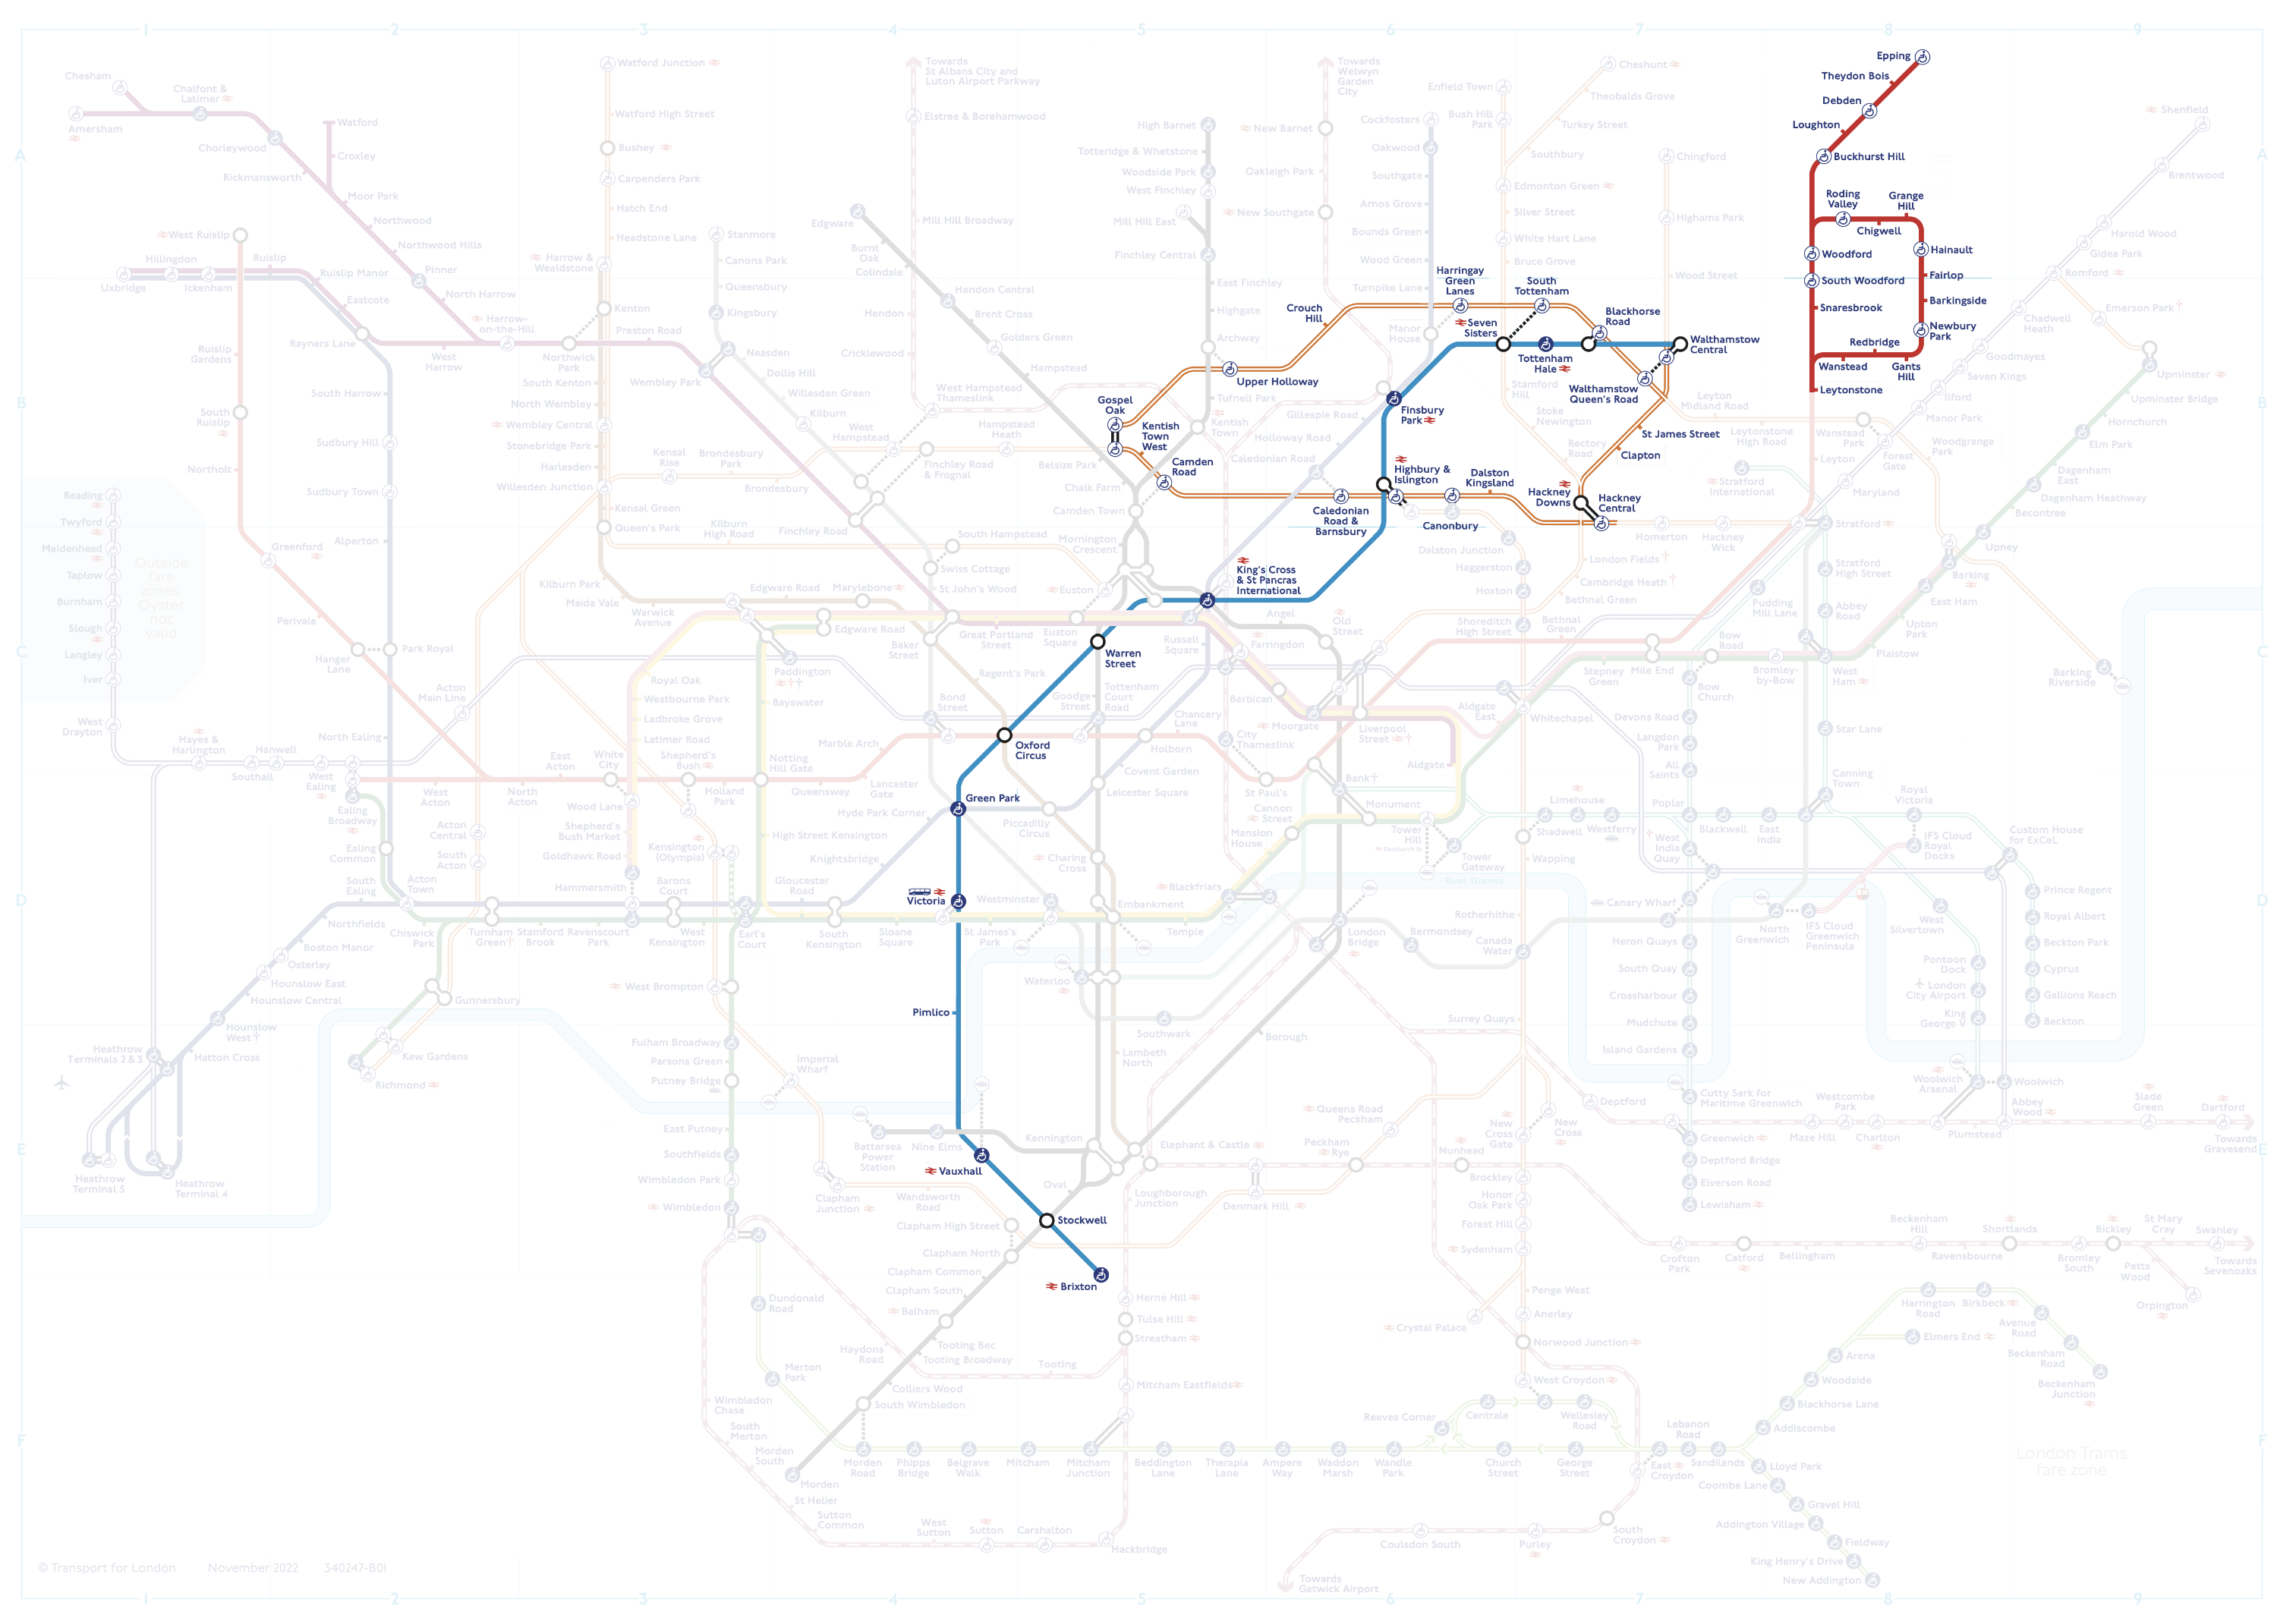 A TfL map showing parts of the London Overground, the Victoria line and the north-eastern end of the Central line highlighted.